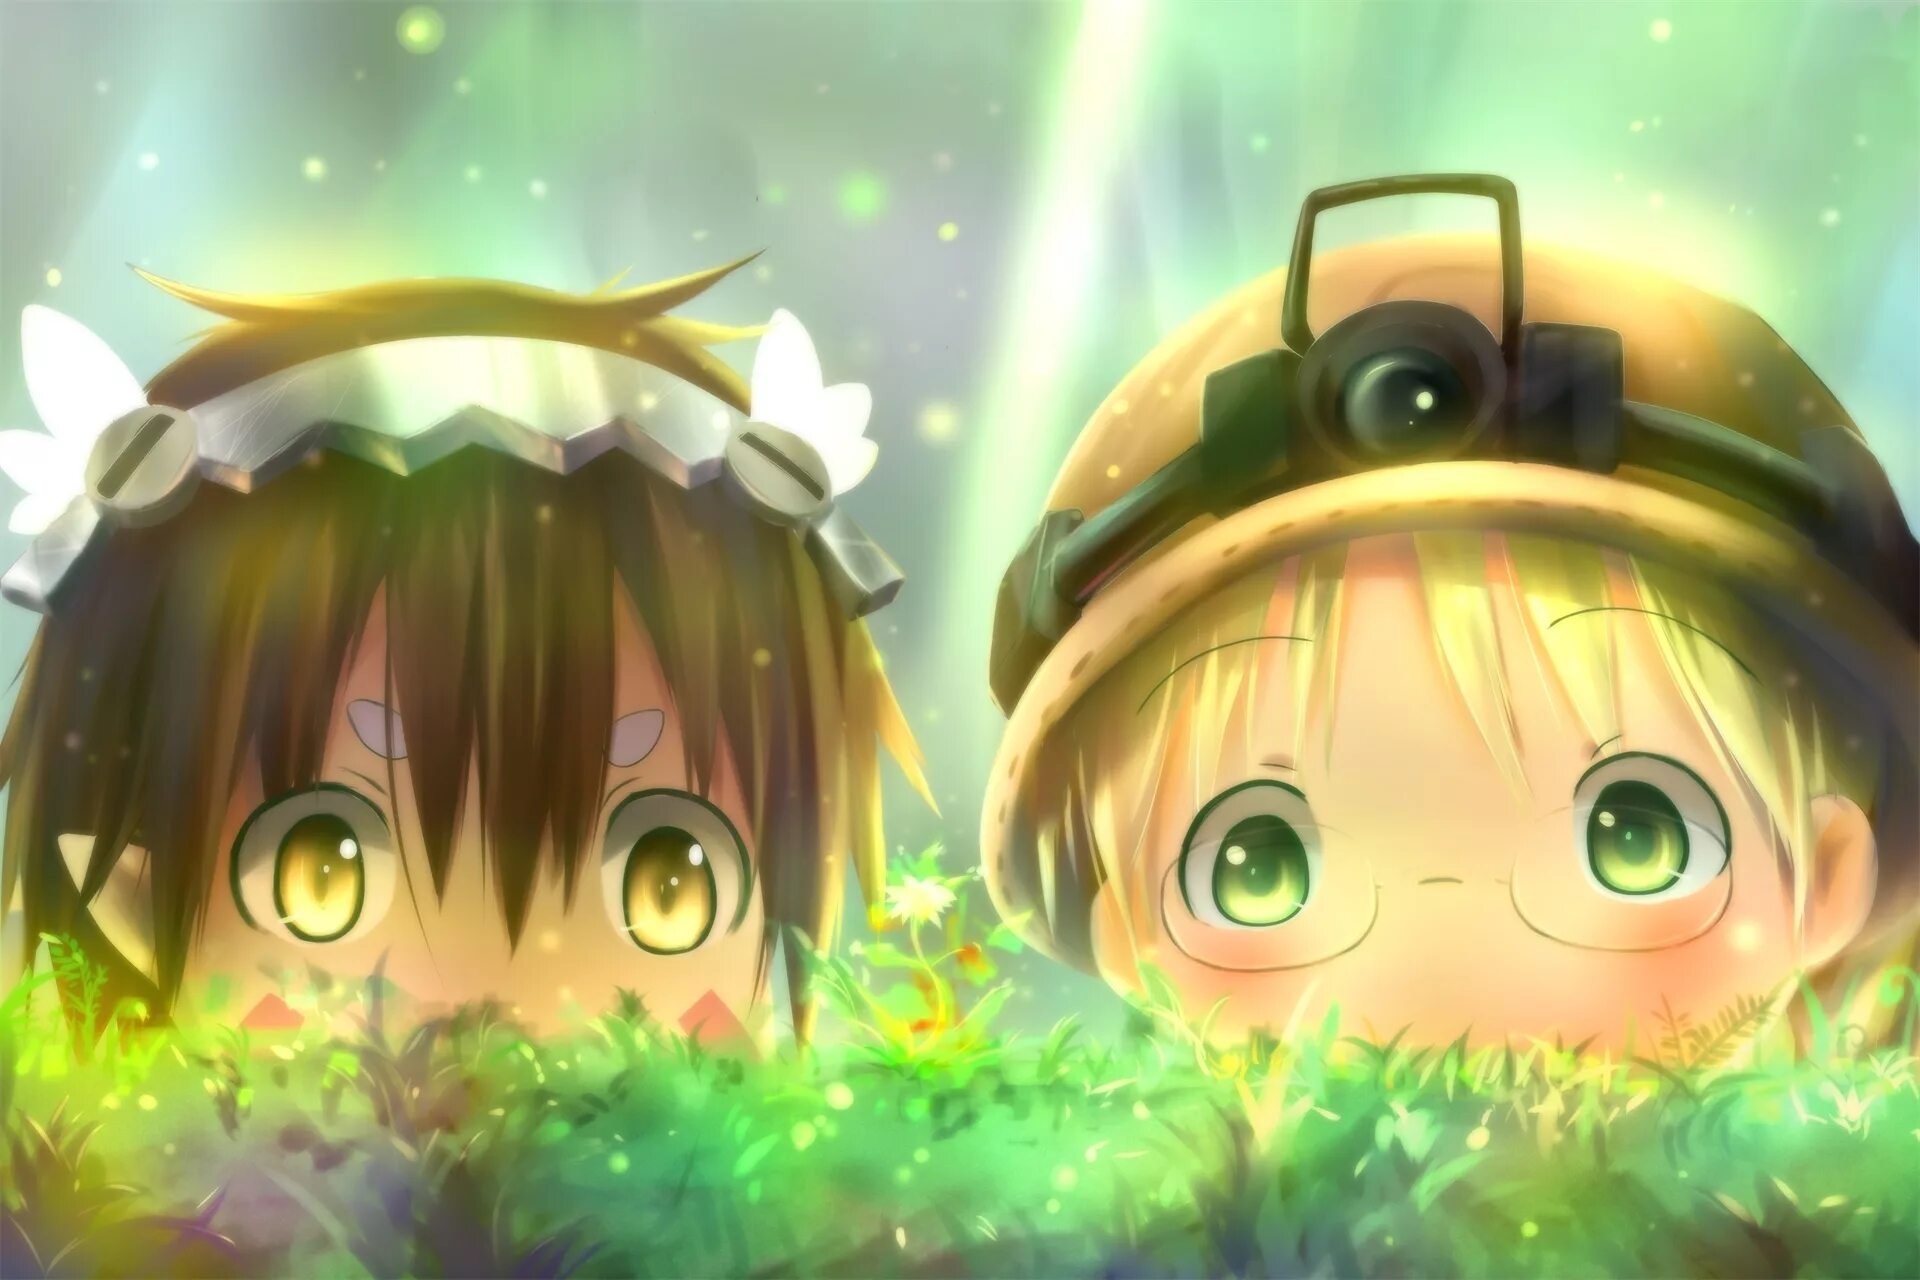 Made in Abyss Рико и рег. Made in Abyss Рикко. Made in Abyss бездна. Made in Abyss фон. Рико бездна